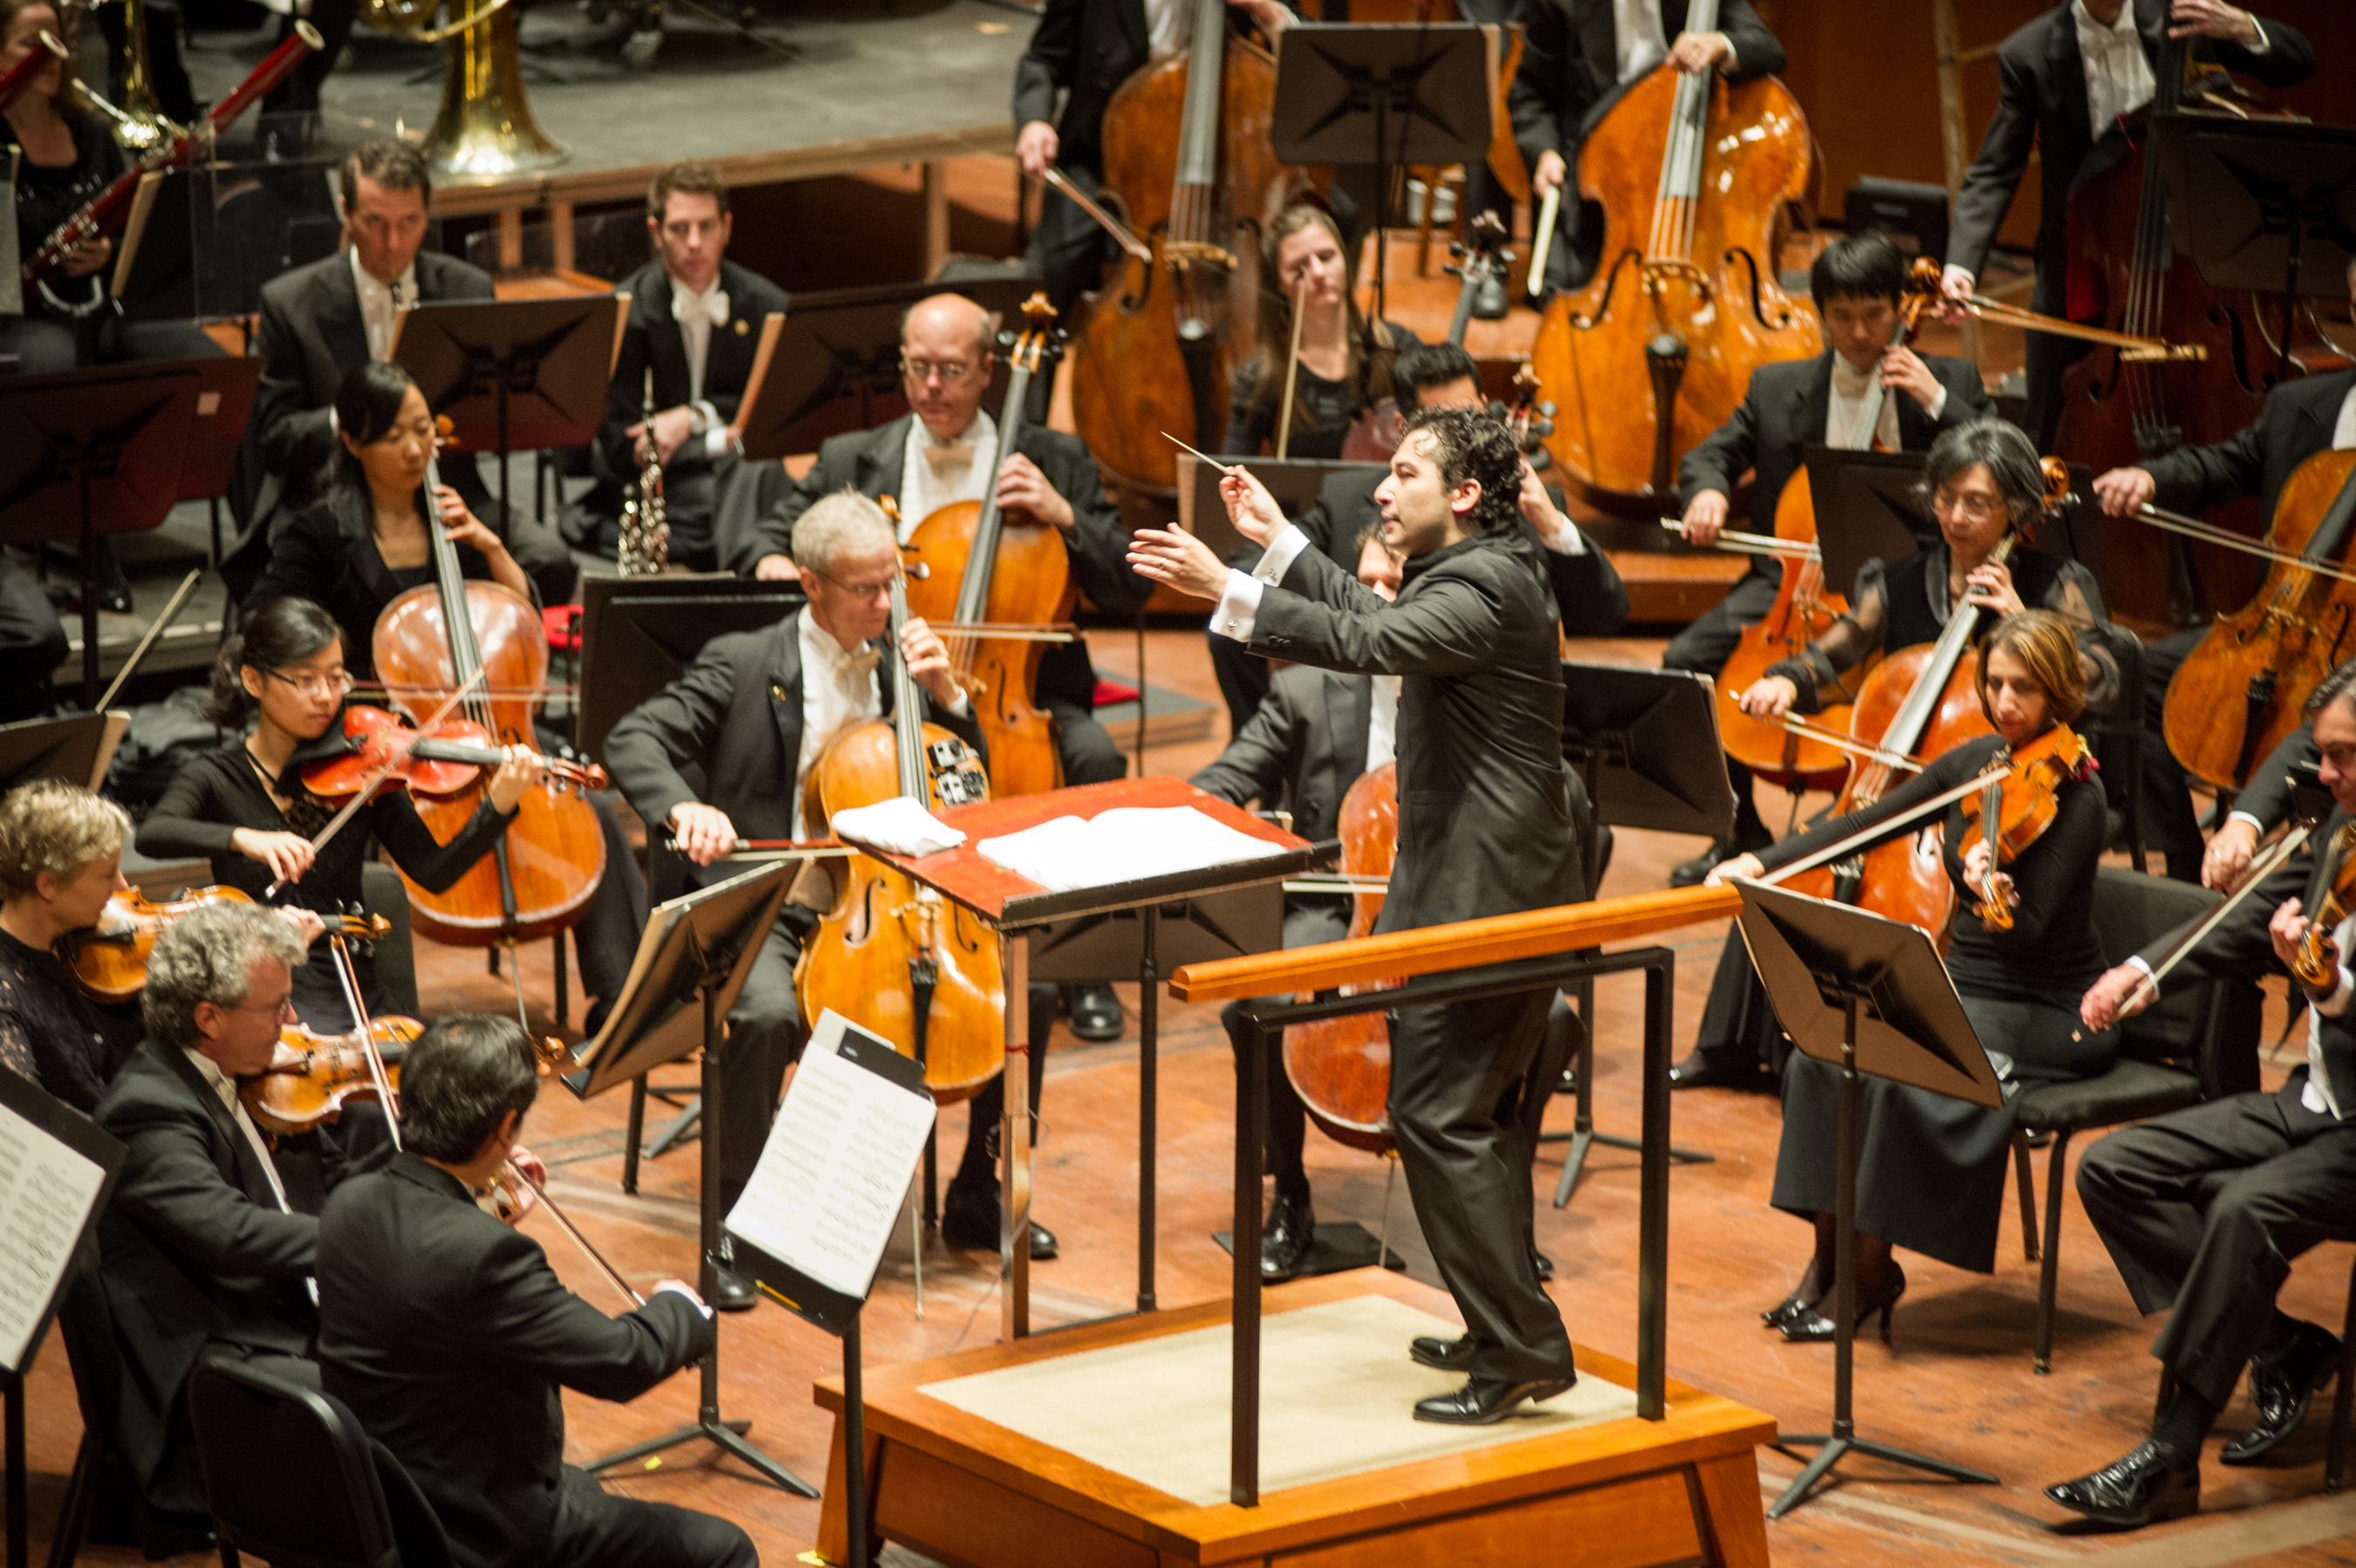 Music Director Designate Andres Orozco-Estrada leading the Houston Symphony. A dynamic young conductor, intensely musical and technically consummate, Orozco-Estrada's inaugural season as Music Director begins with the 2014 - 2015 season. (PRNewsFoto/Houston Symphony)